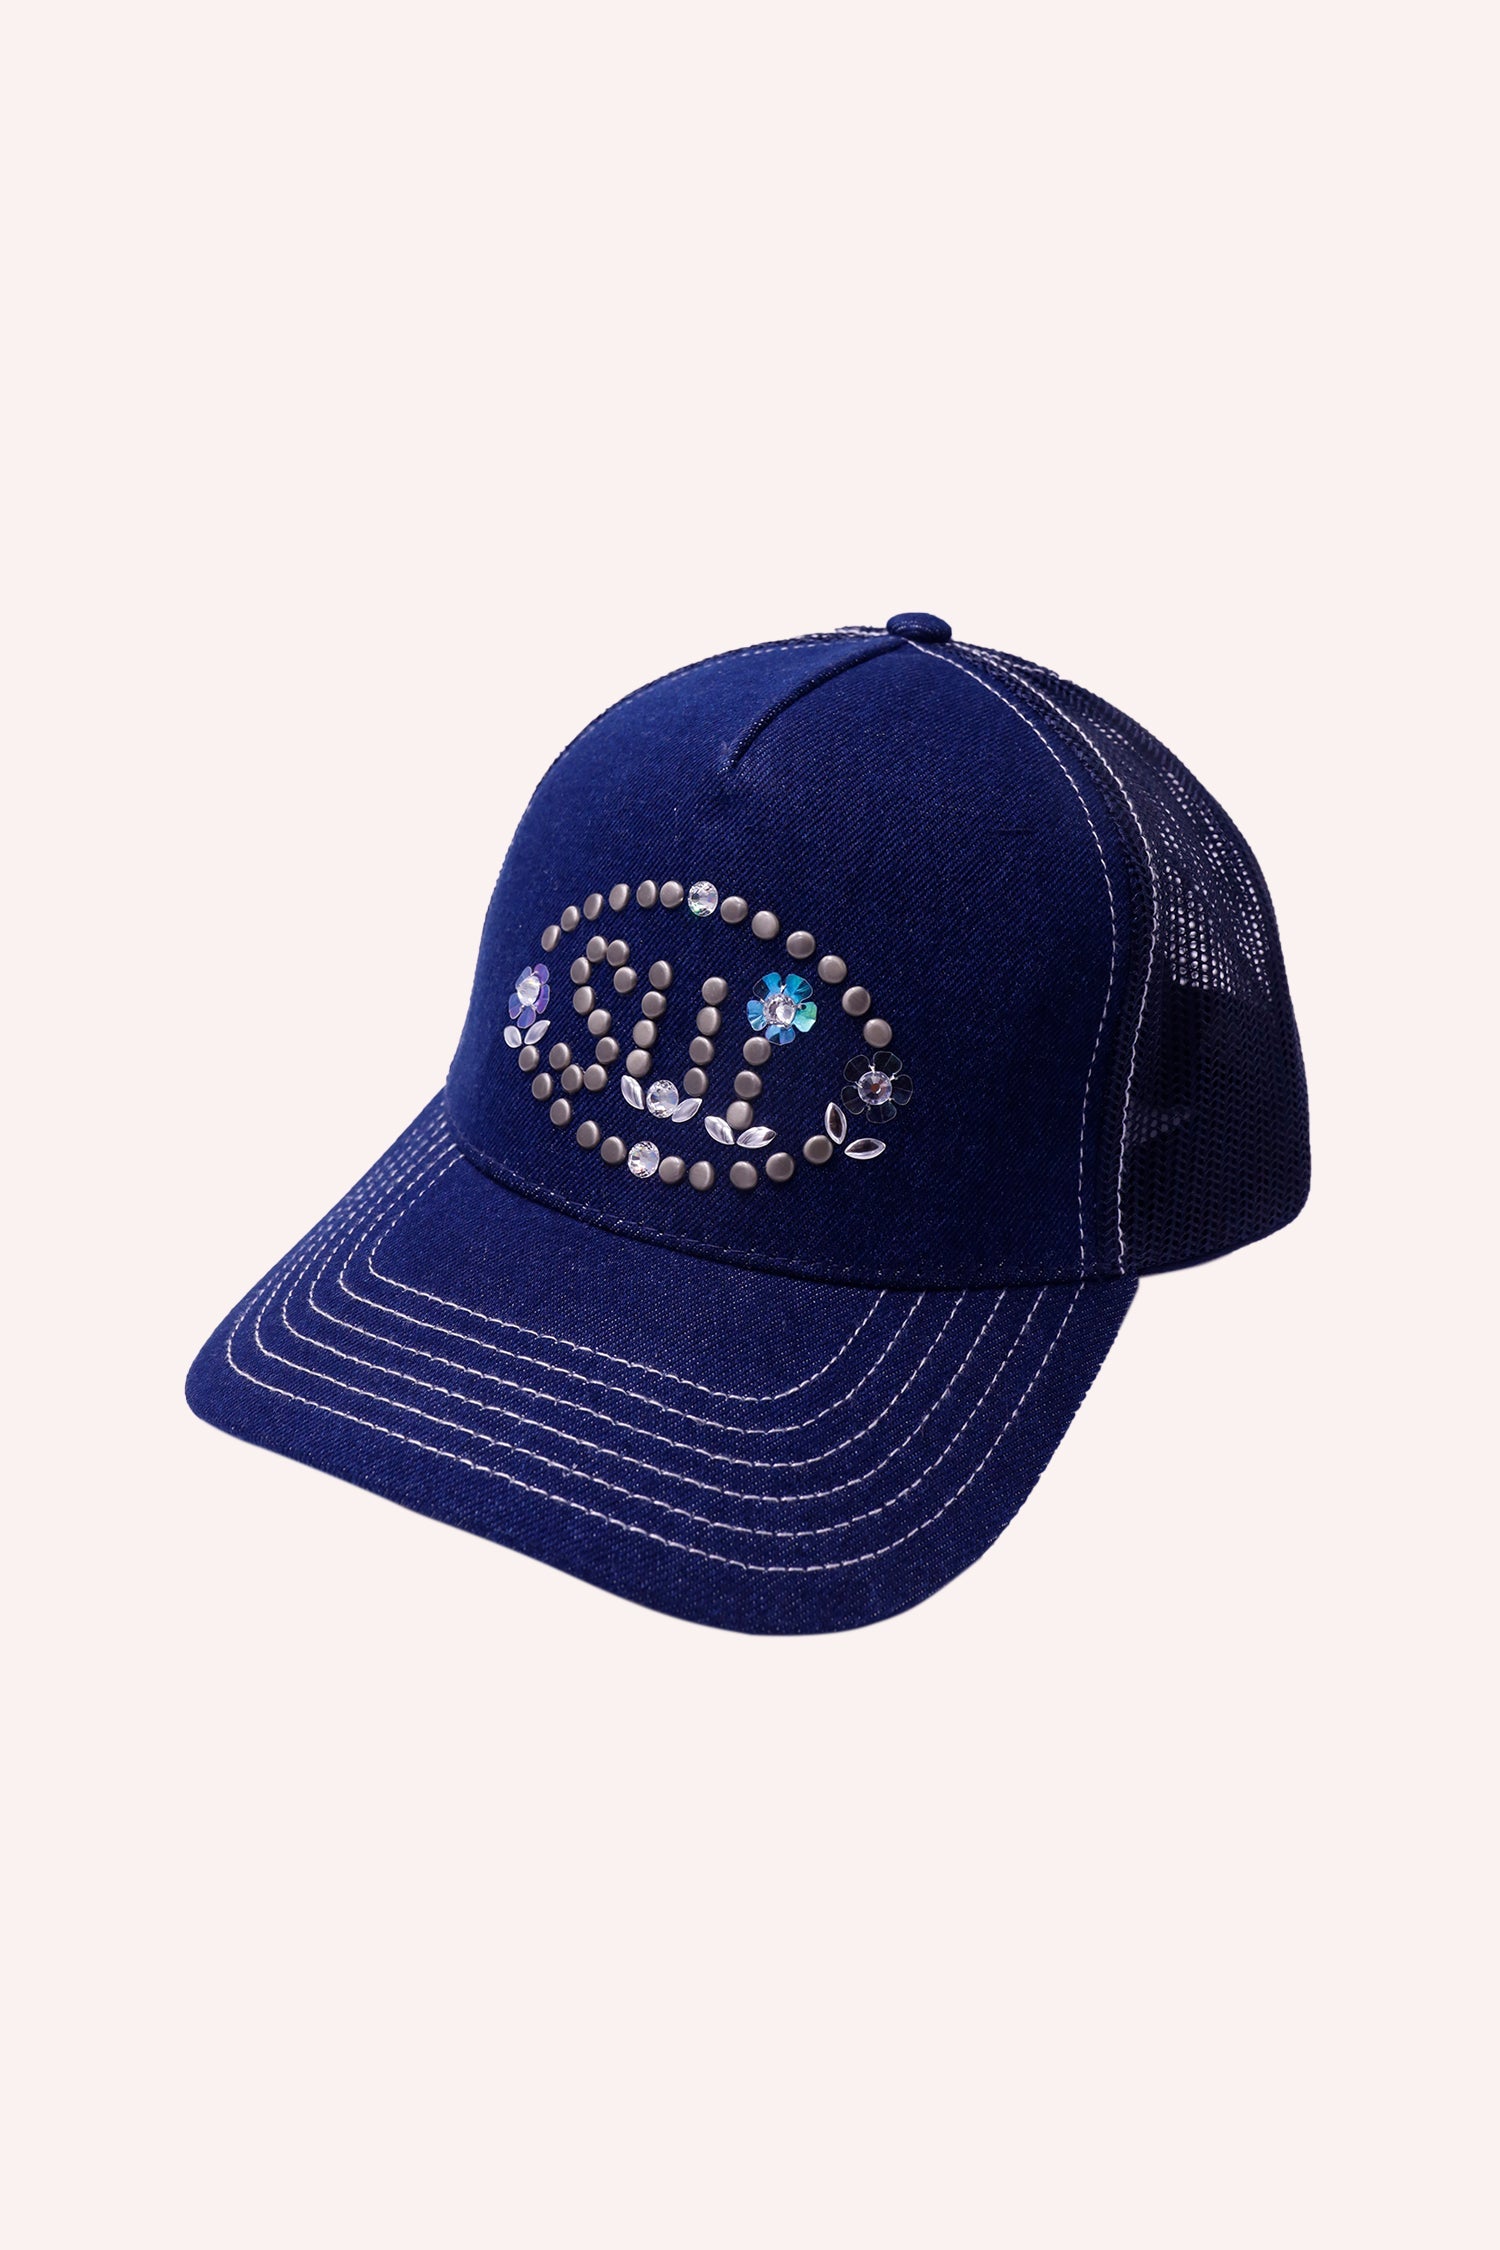 Denim baseball hat with white stitches and studded Sui logo inside an oval with a floral design